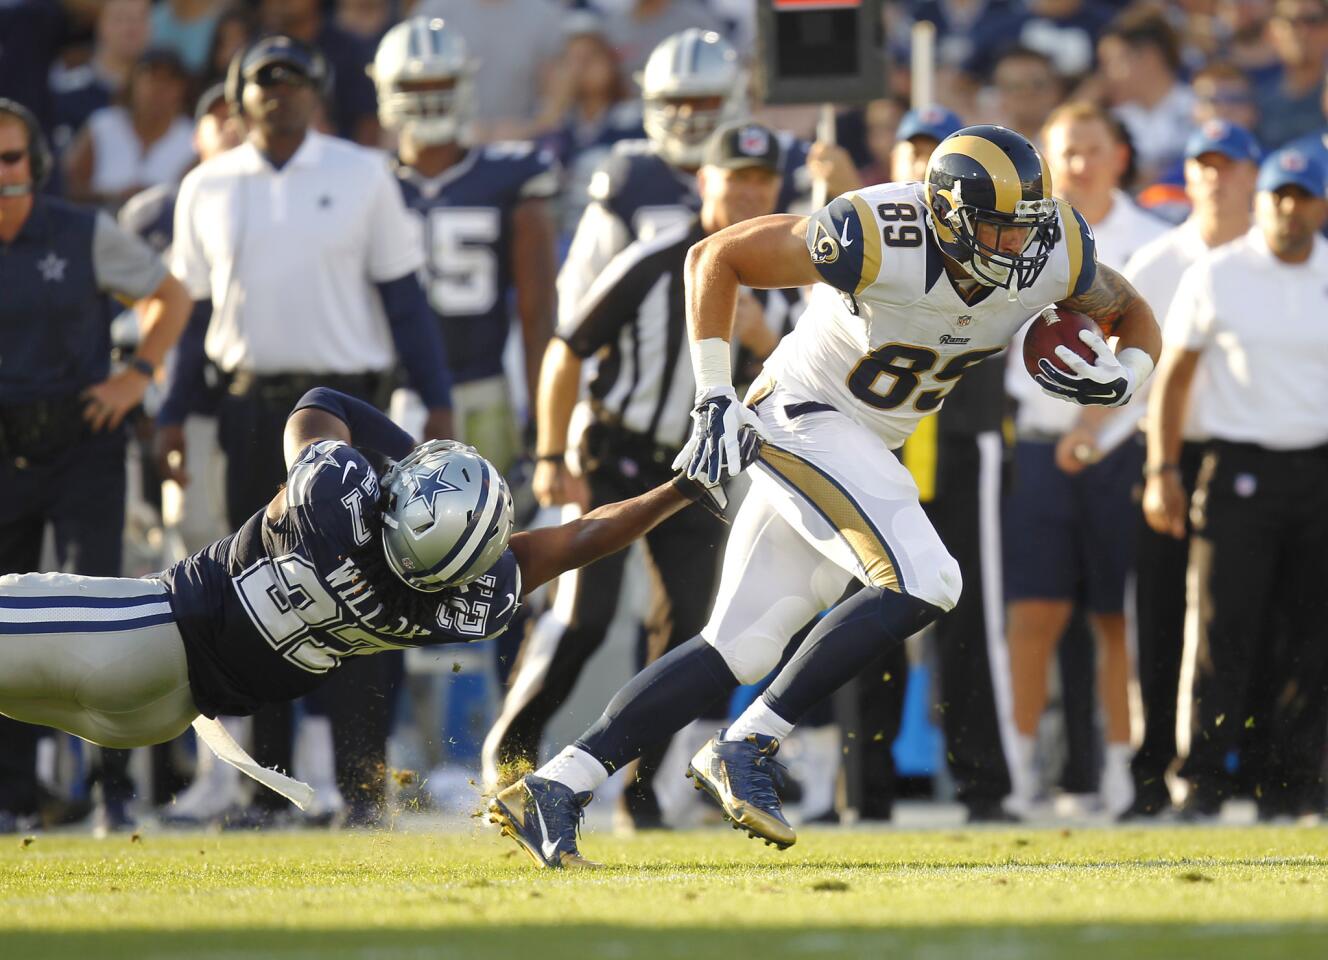 Rams tight end Tyler Higbee runs for a first down after a reception in the second quarter.